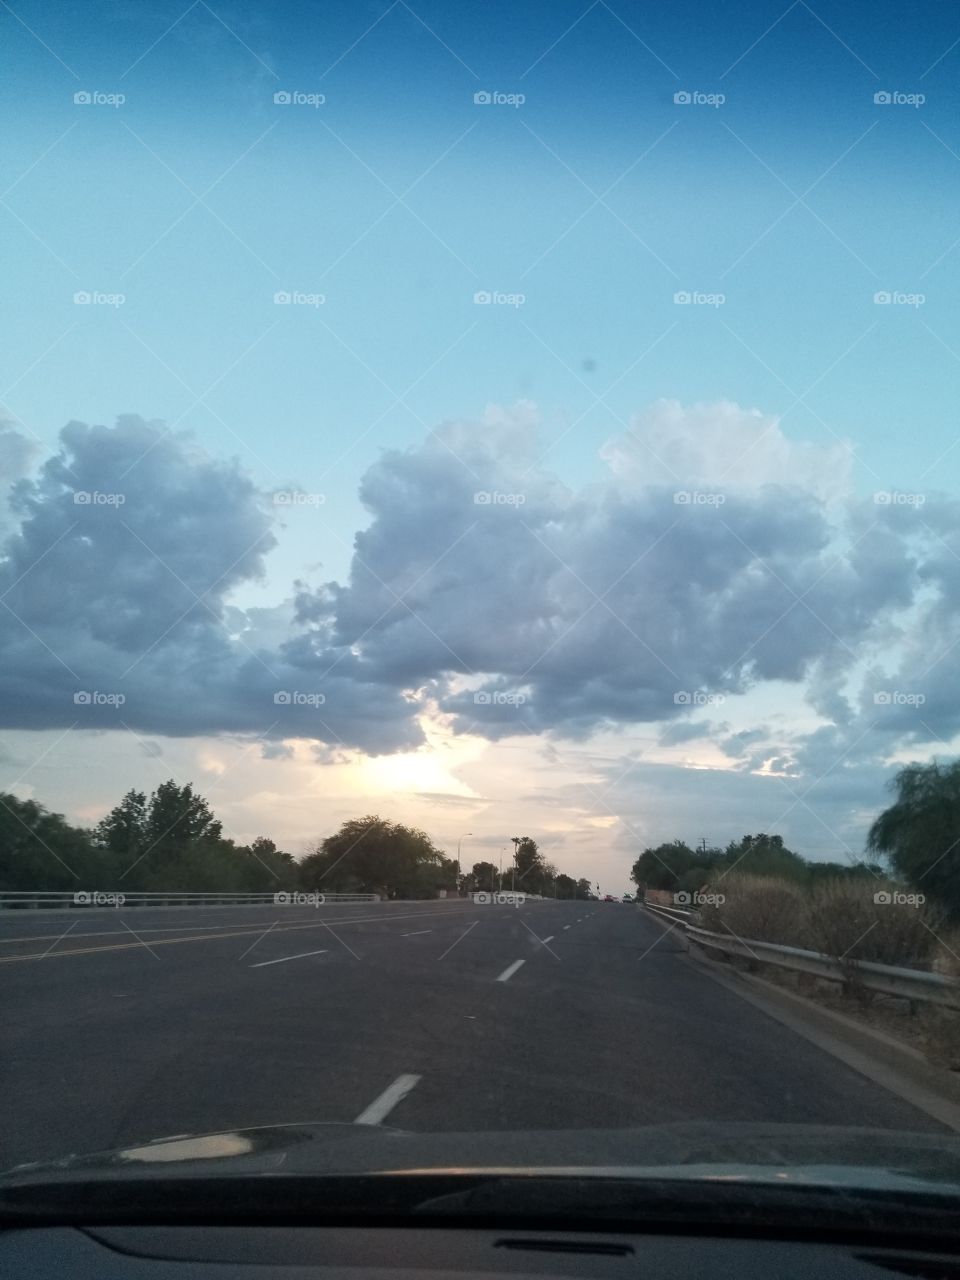 Sunset in #Az,  monsoon is coming and it's looking amazing! Road tripping again